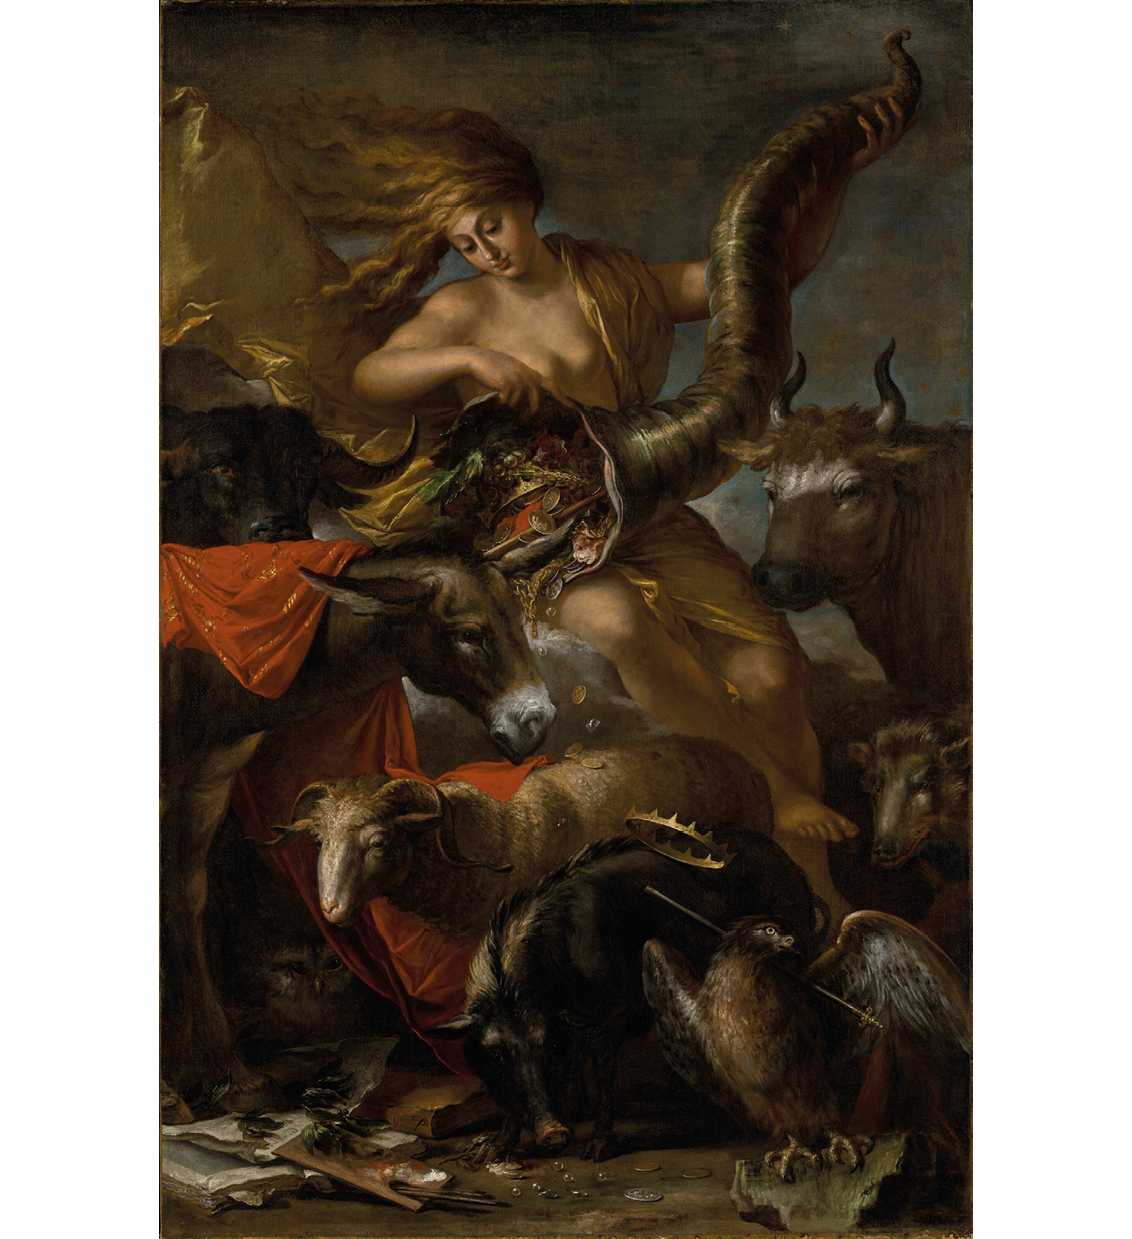 A 17th-century Italian oil painting: depicts the Roman goddess of fortune, Fortuna dressed in a loose golden robe holding a cornucopia full of riches; surrounding her are various types of animals; on the left of the painting are bull, an owl, and a donkey with a red cloth; below are a ram and a hog; on the right is an eagle with a crown and small sword falling on top of it, a wolf, and a cow.